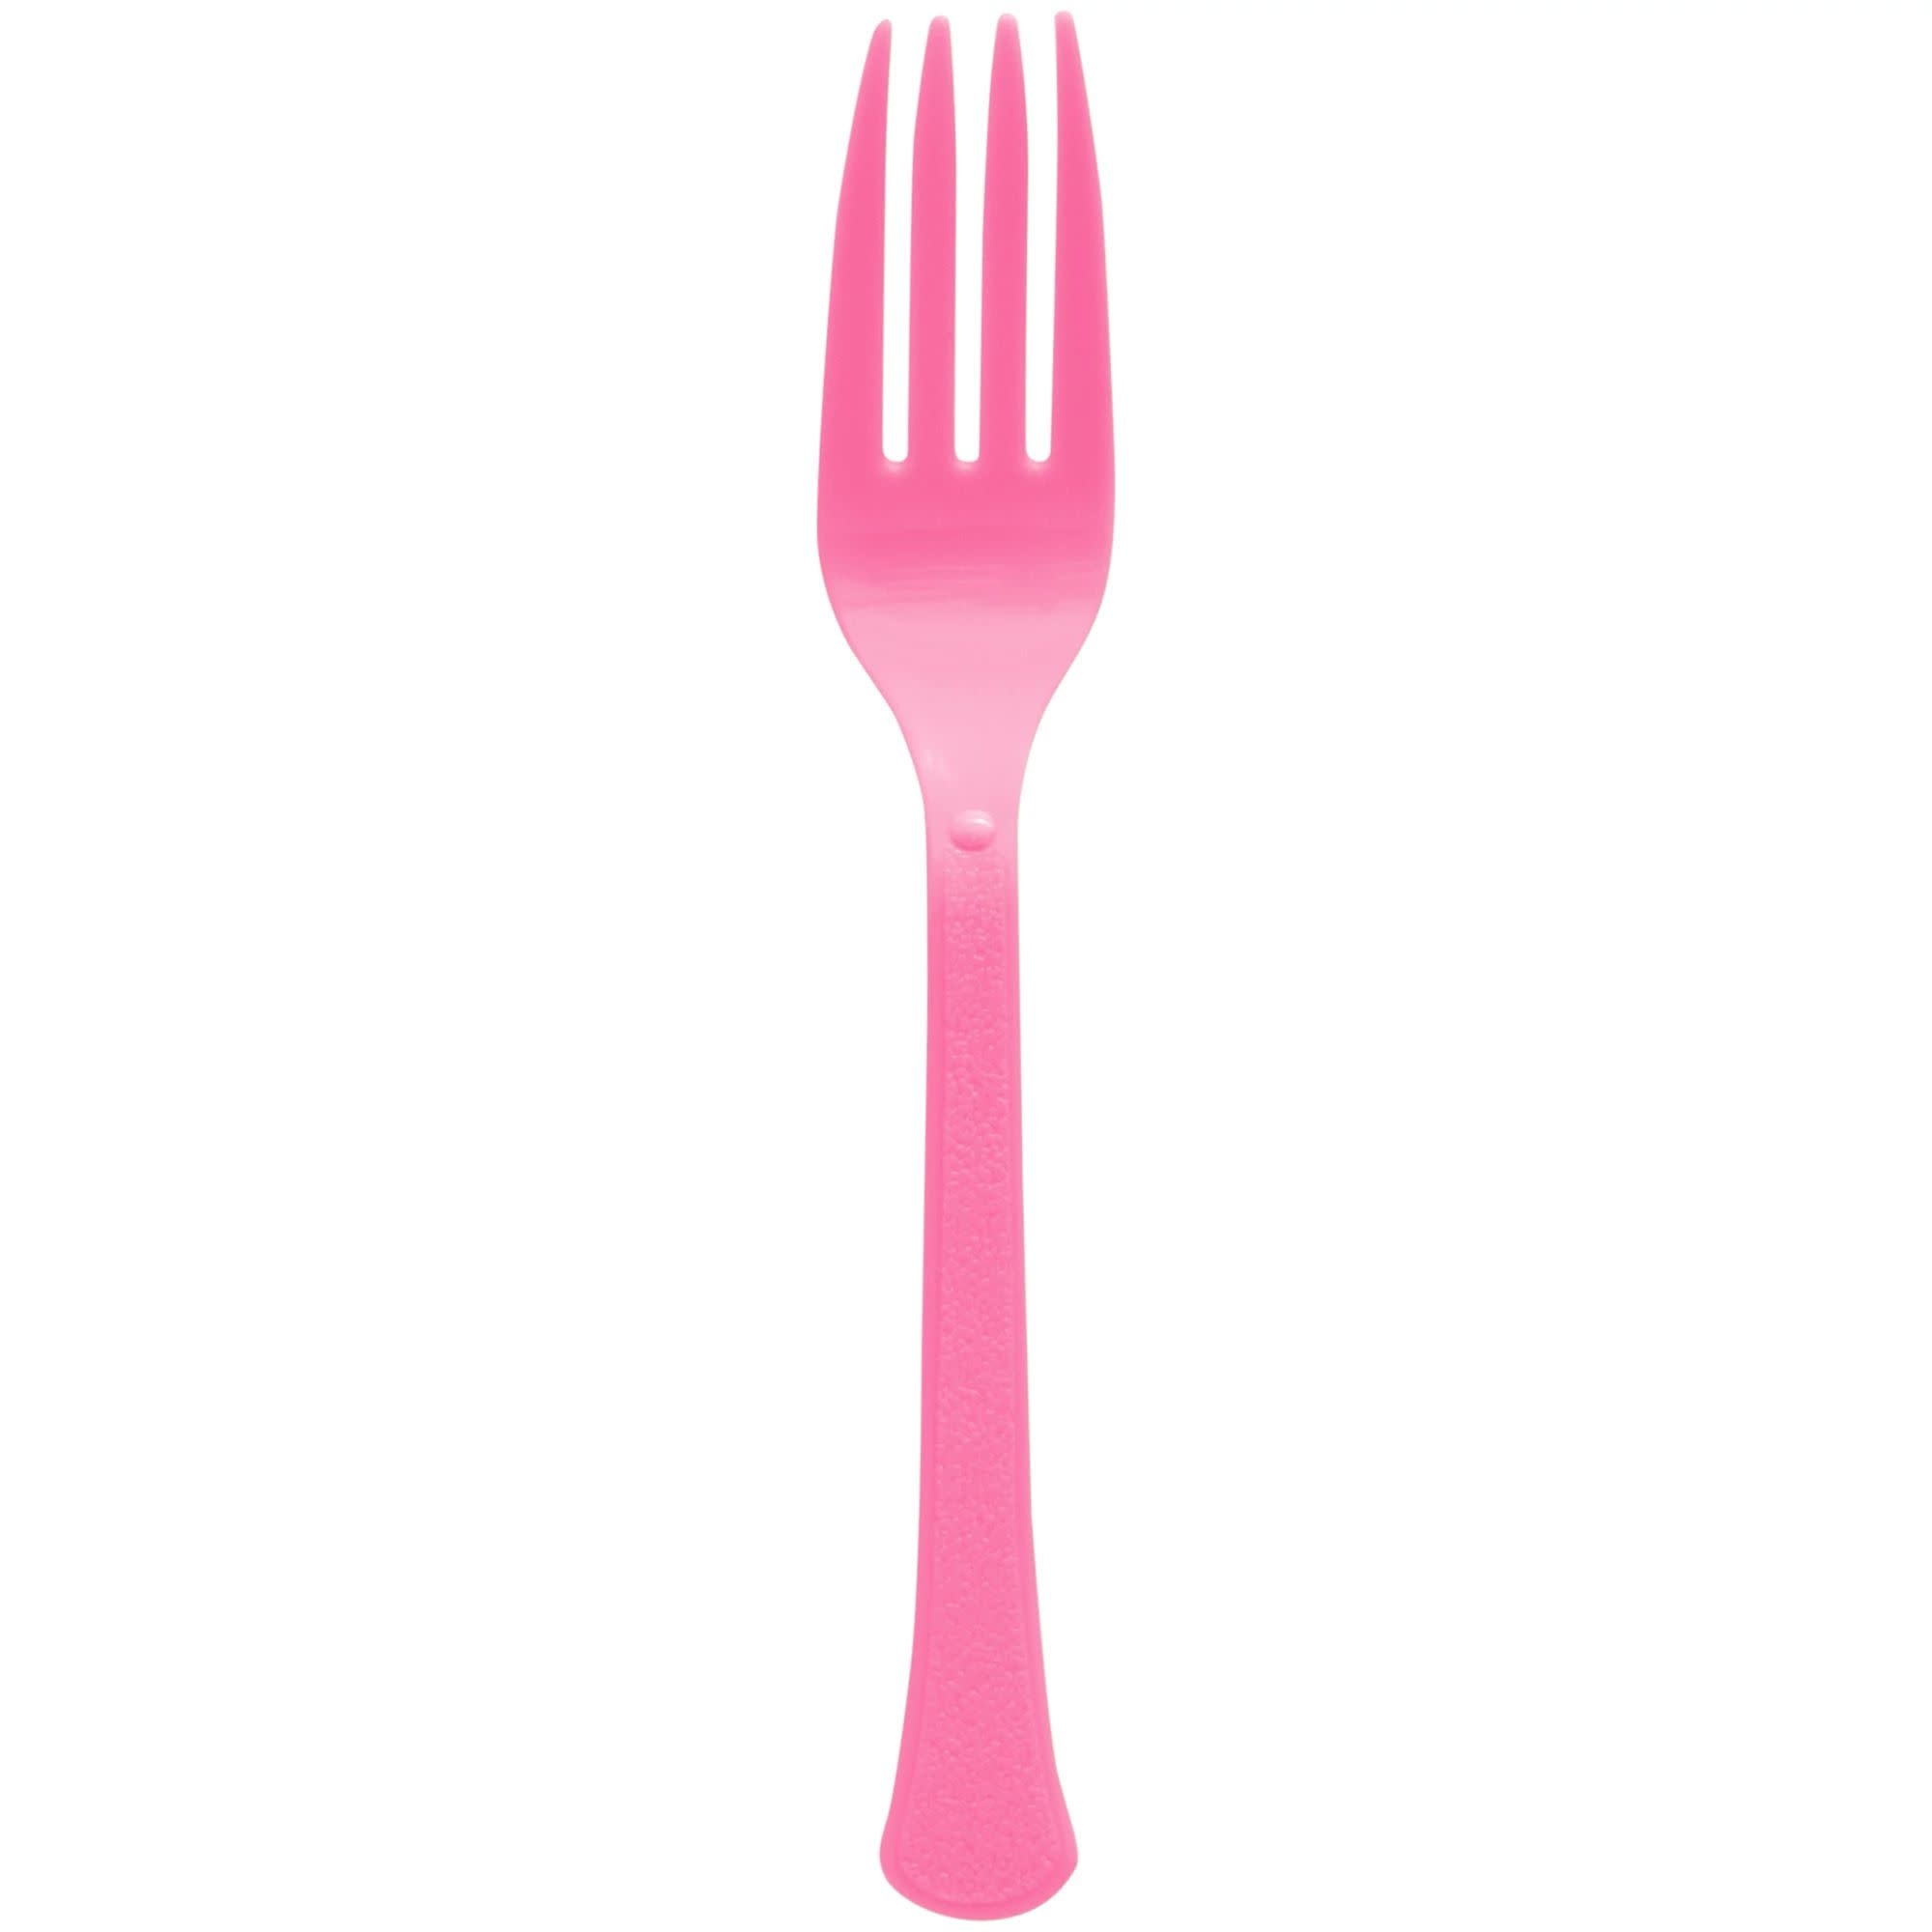 Boxed, Heavy Weight Forks, High Ct. - Bright Pink (50 Count)